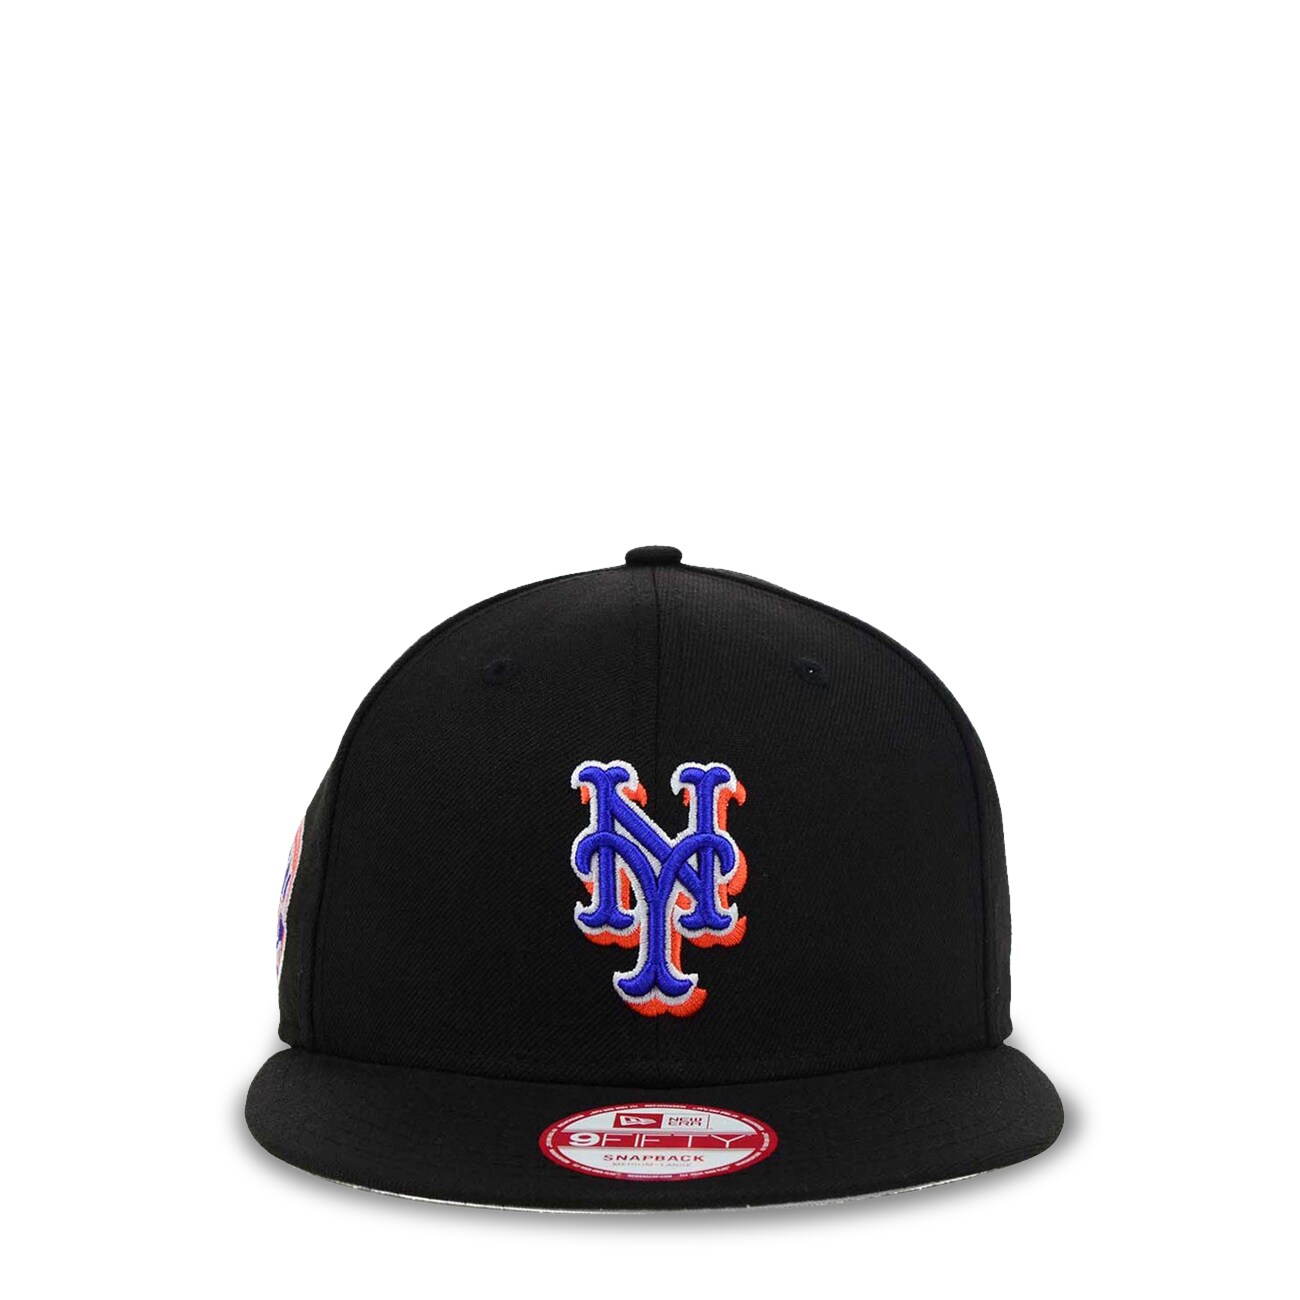 3930 New York Mets Mother's Day 23 Cap - Baseball Town